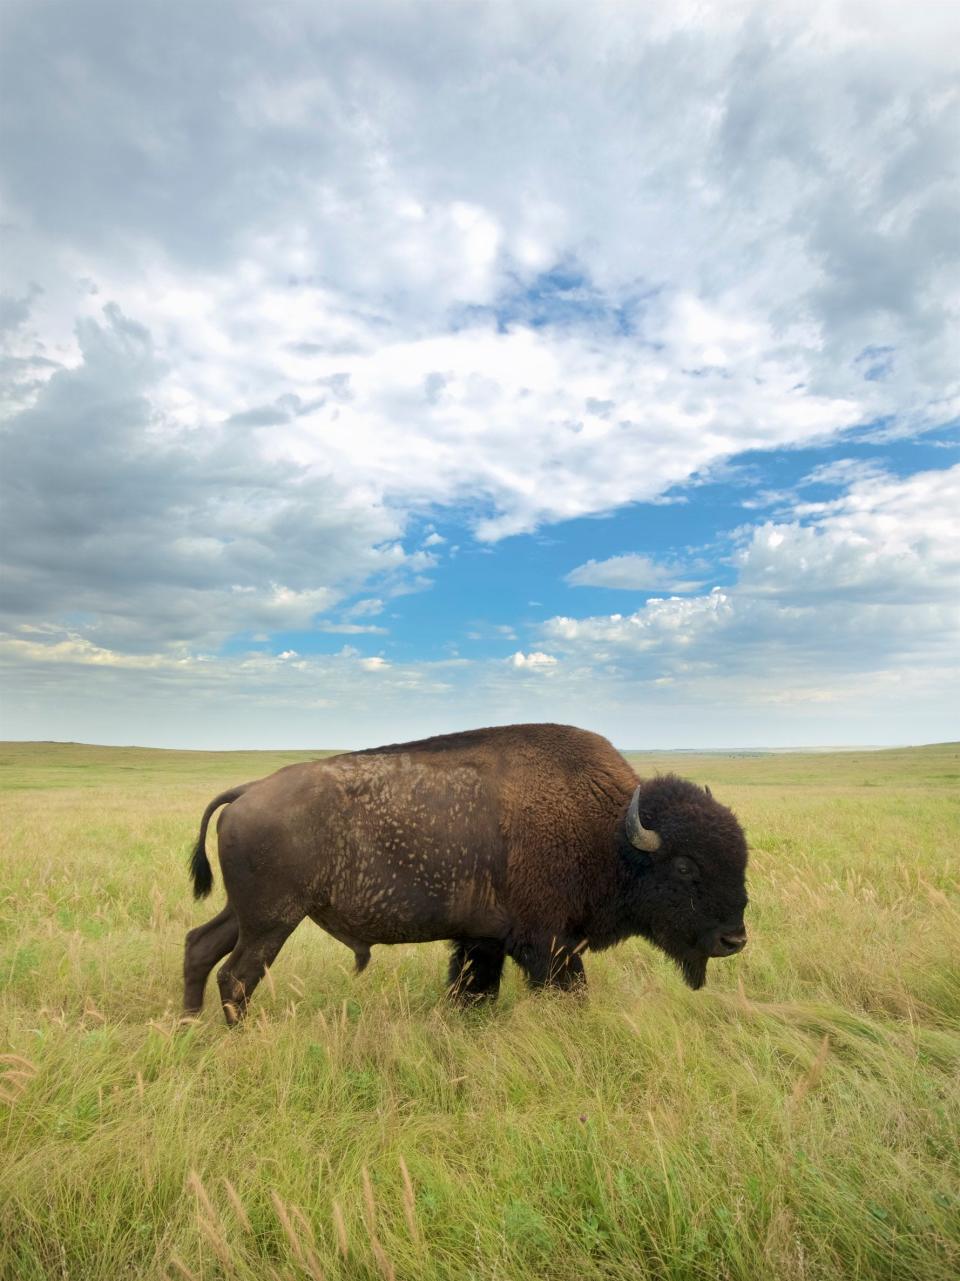 A bison grazes at The Nature Conservancy’s Joseph H. Williams Tallgrass Prairie Preserve in Osage County. The herd is the Conservancy’s largest with more than 2000 bison.